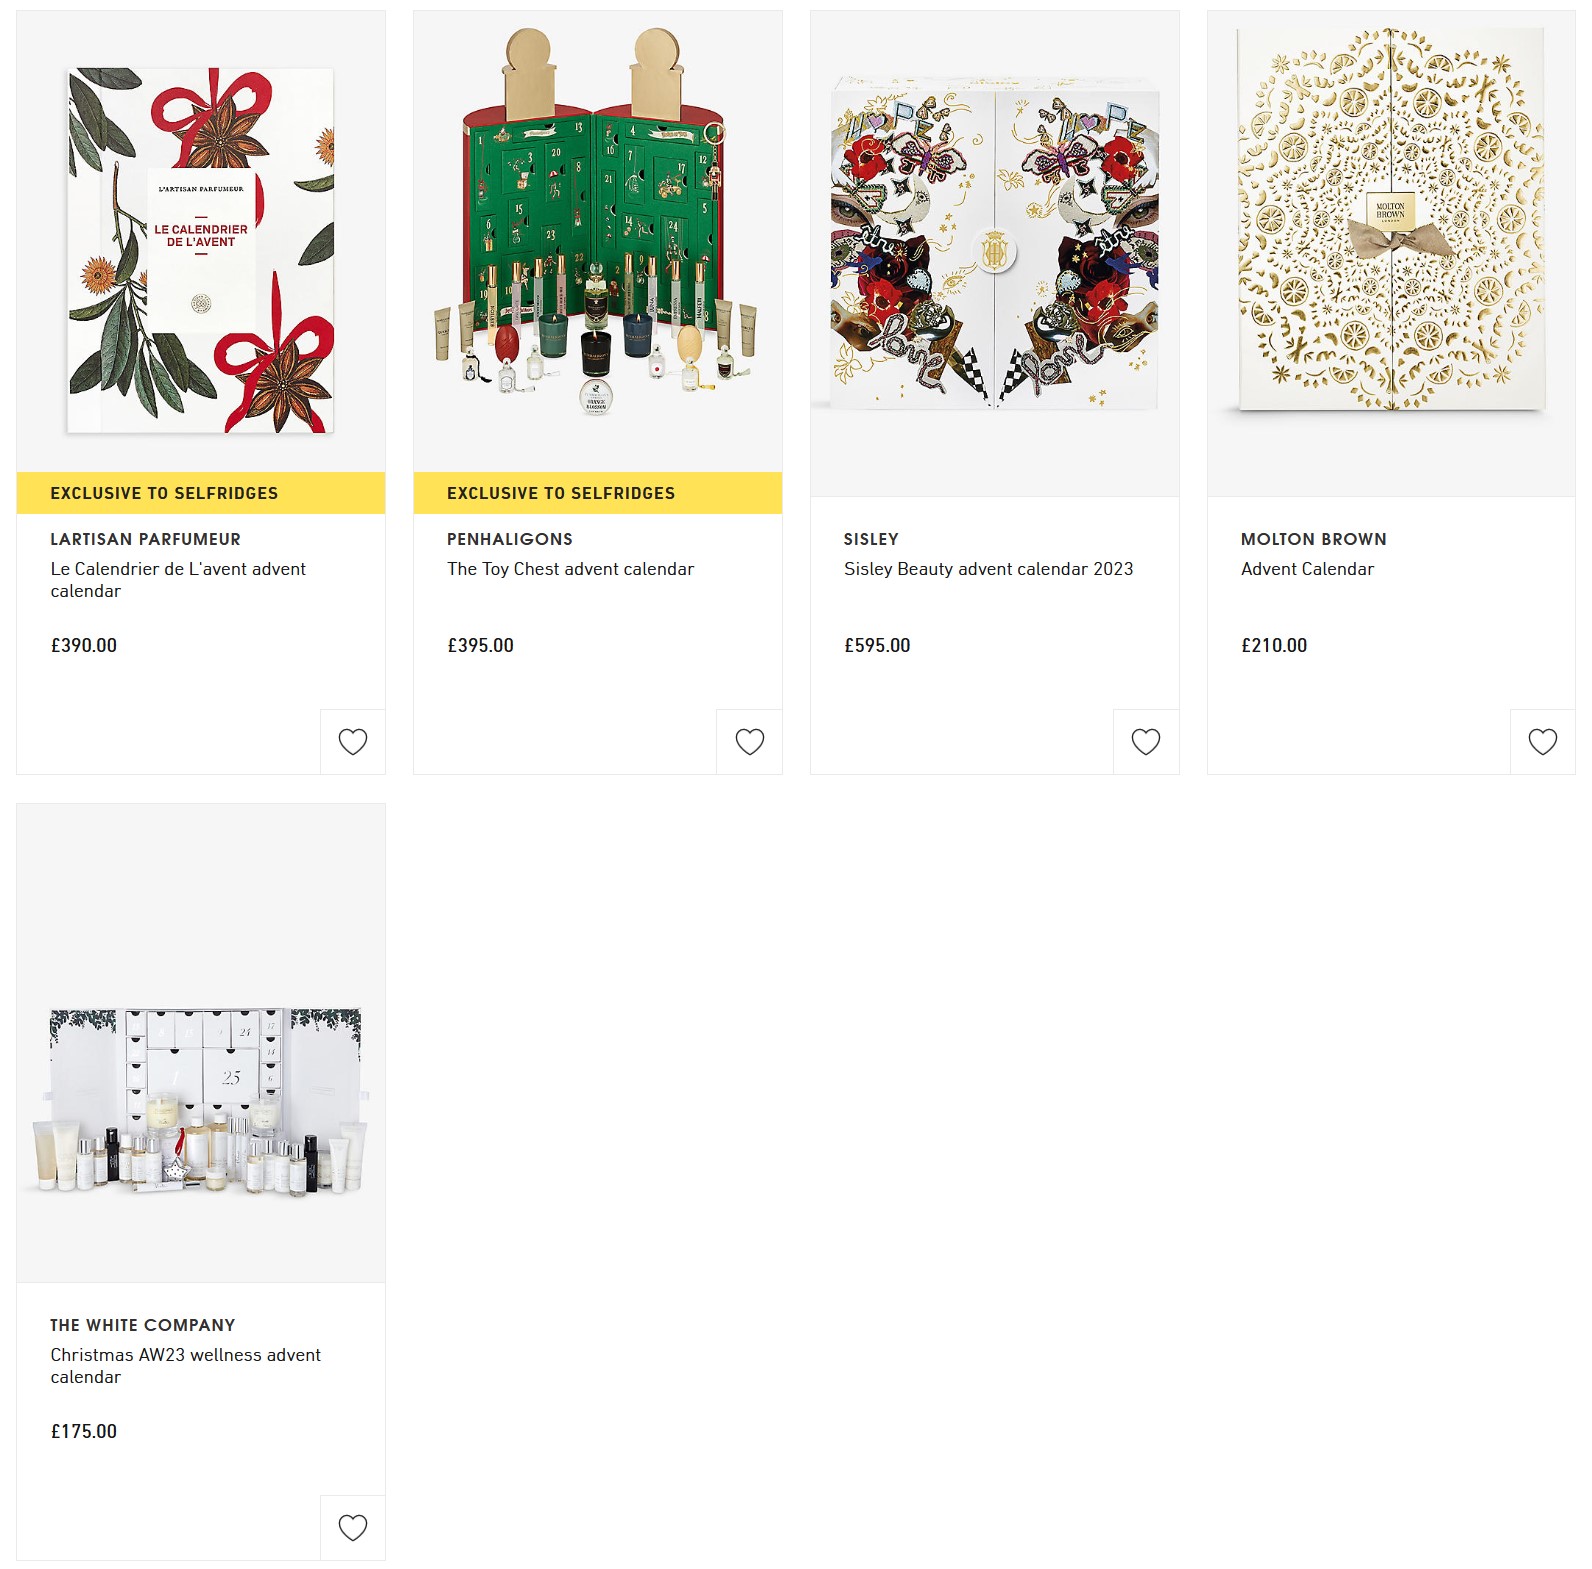 New Beauty Advent Calendars have arrived at Selfridges